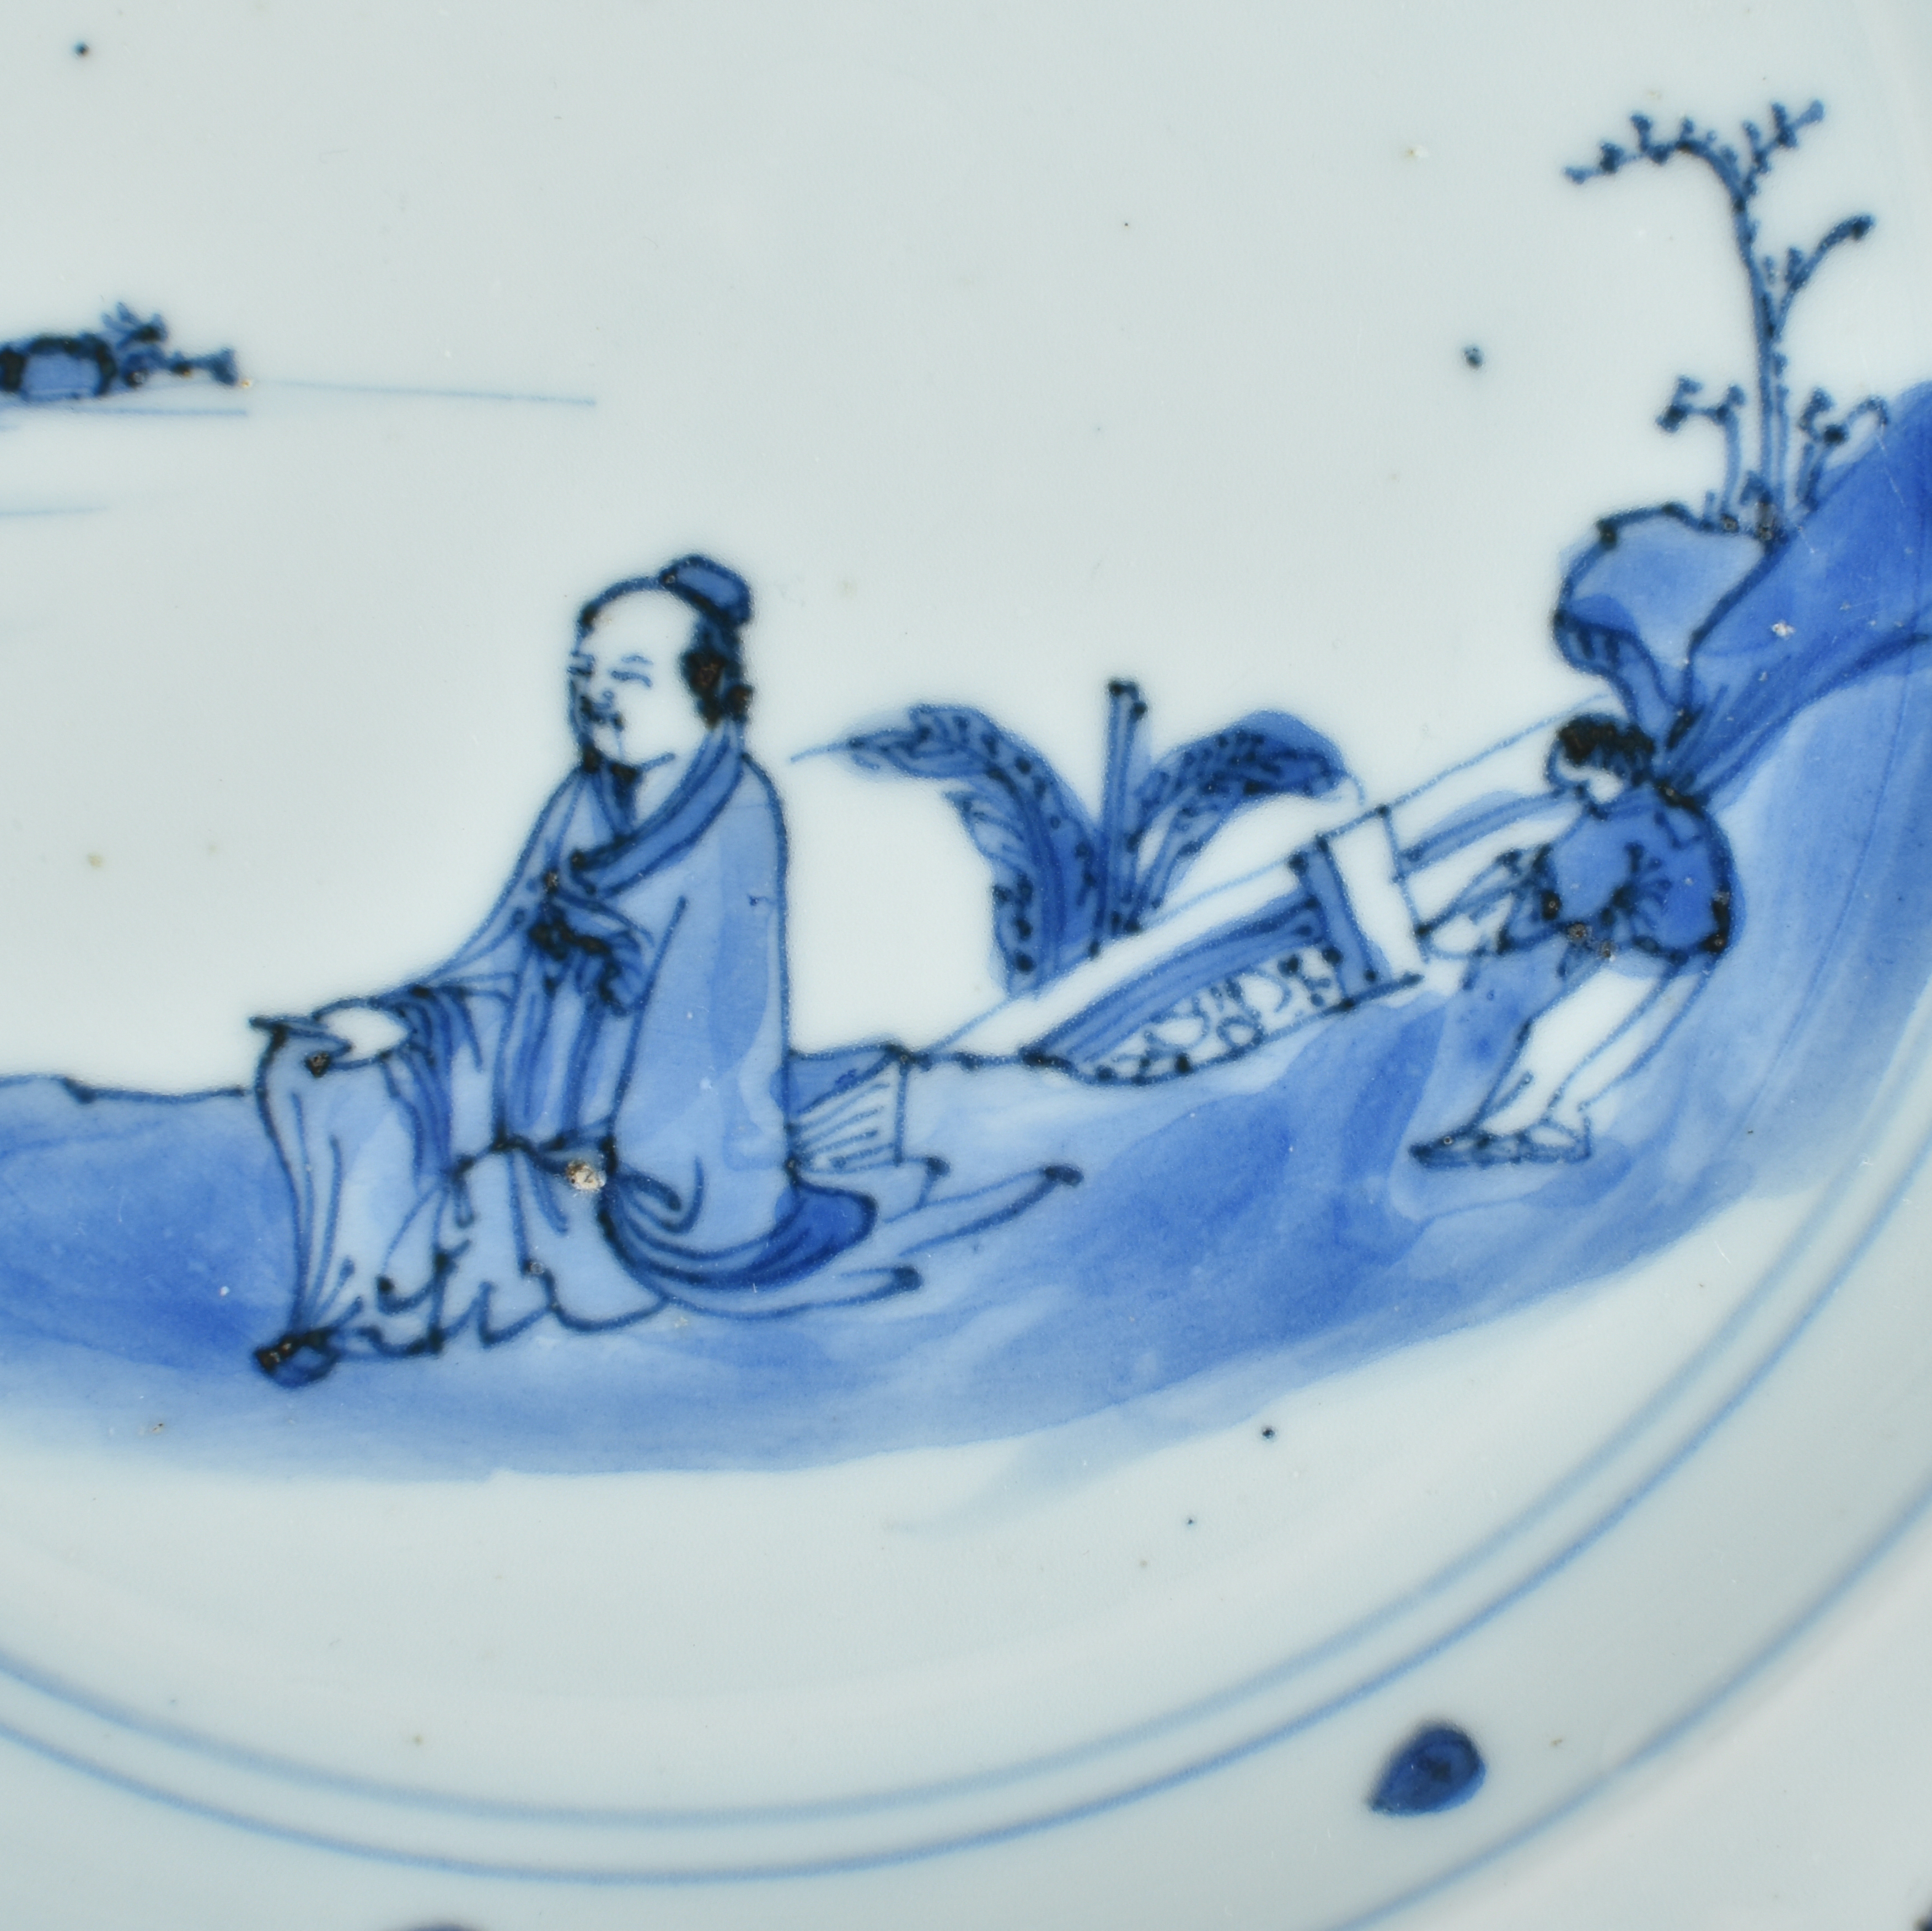 Porcelain Tianqi (1621 – 1627), China (for the Japanese market)